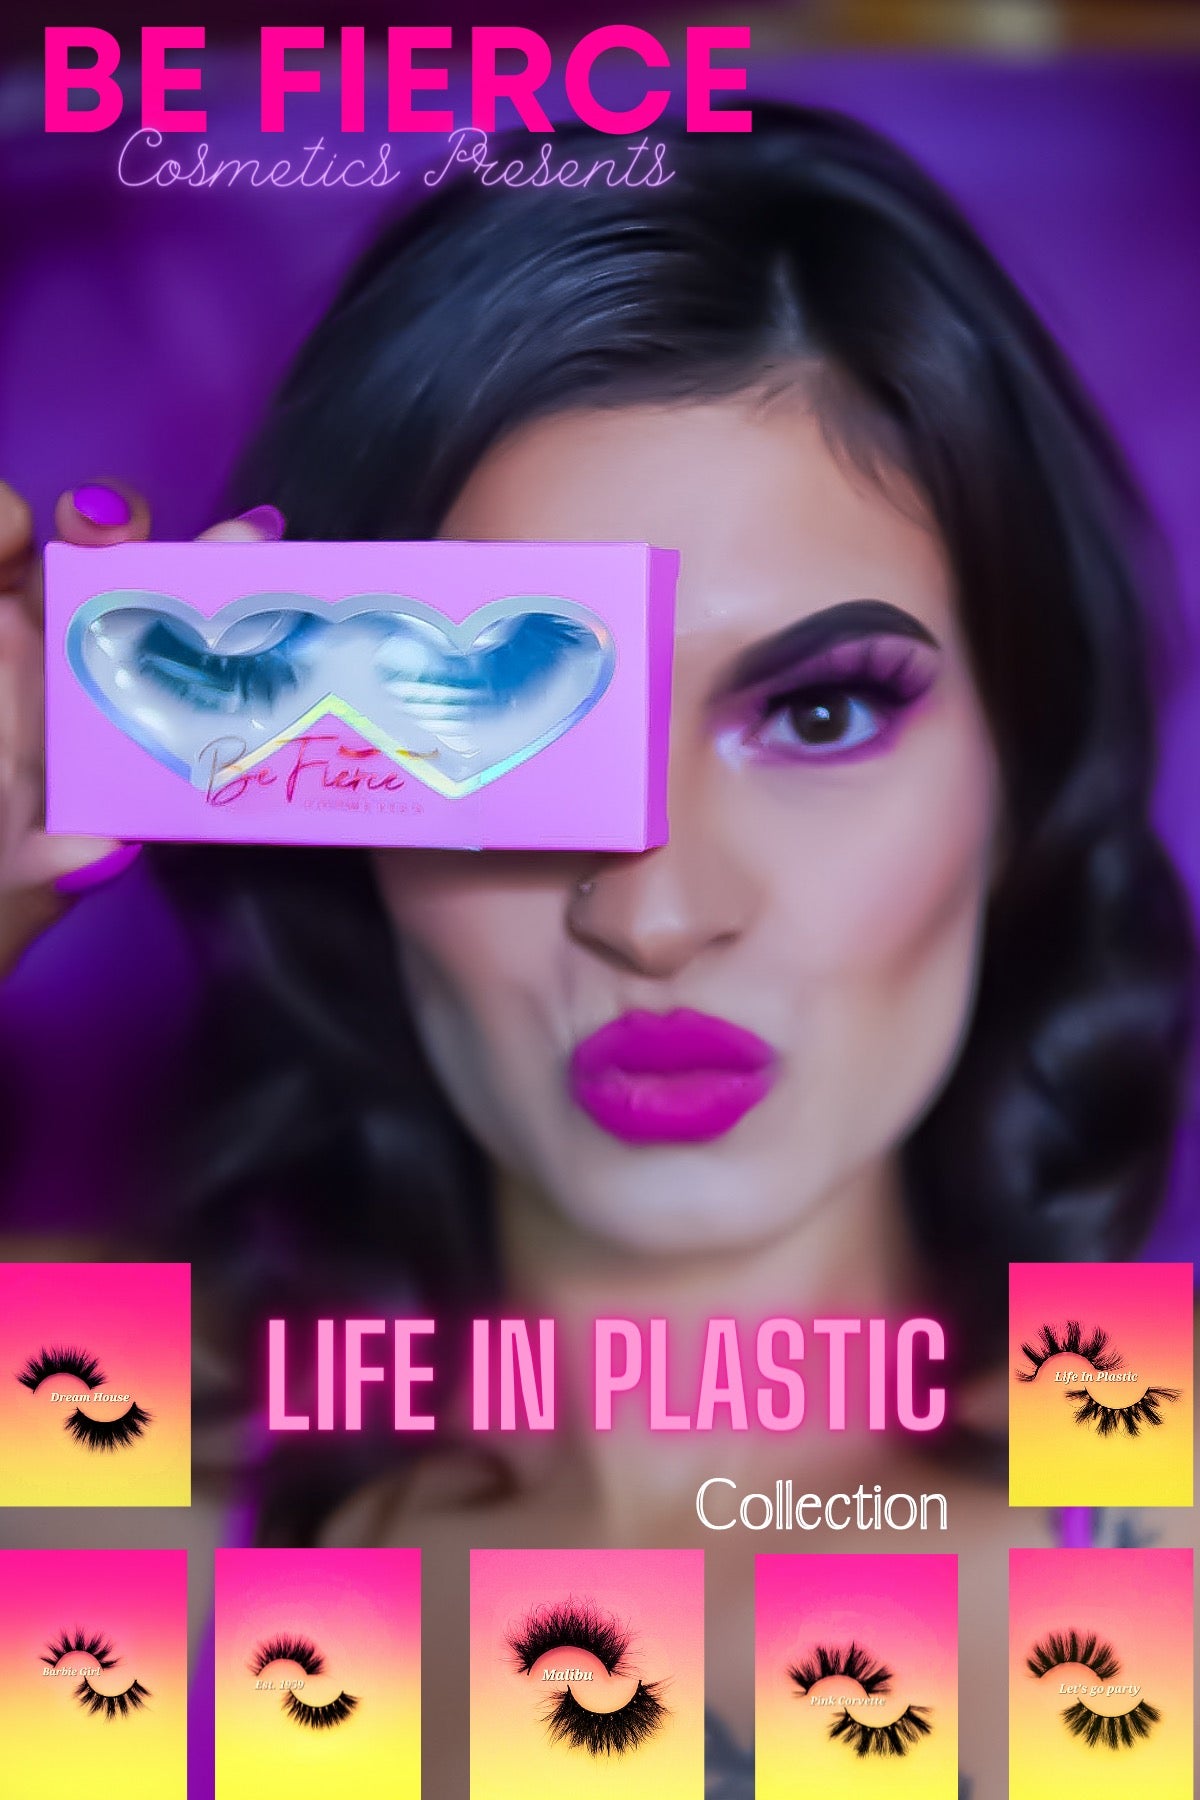 Life in plastic Collection